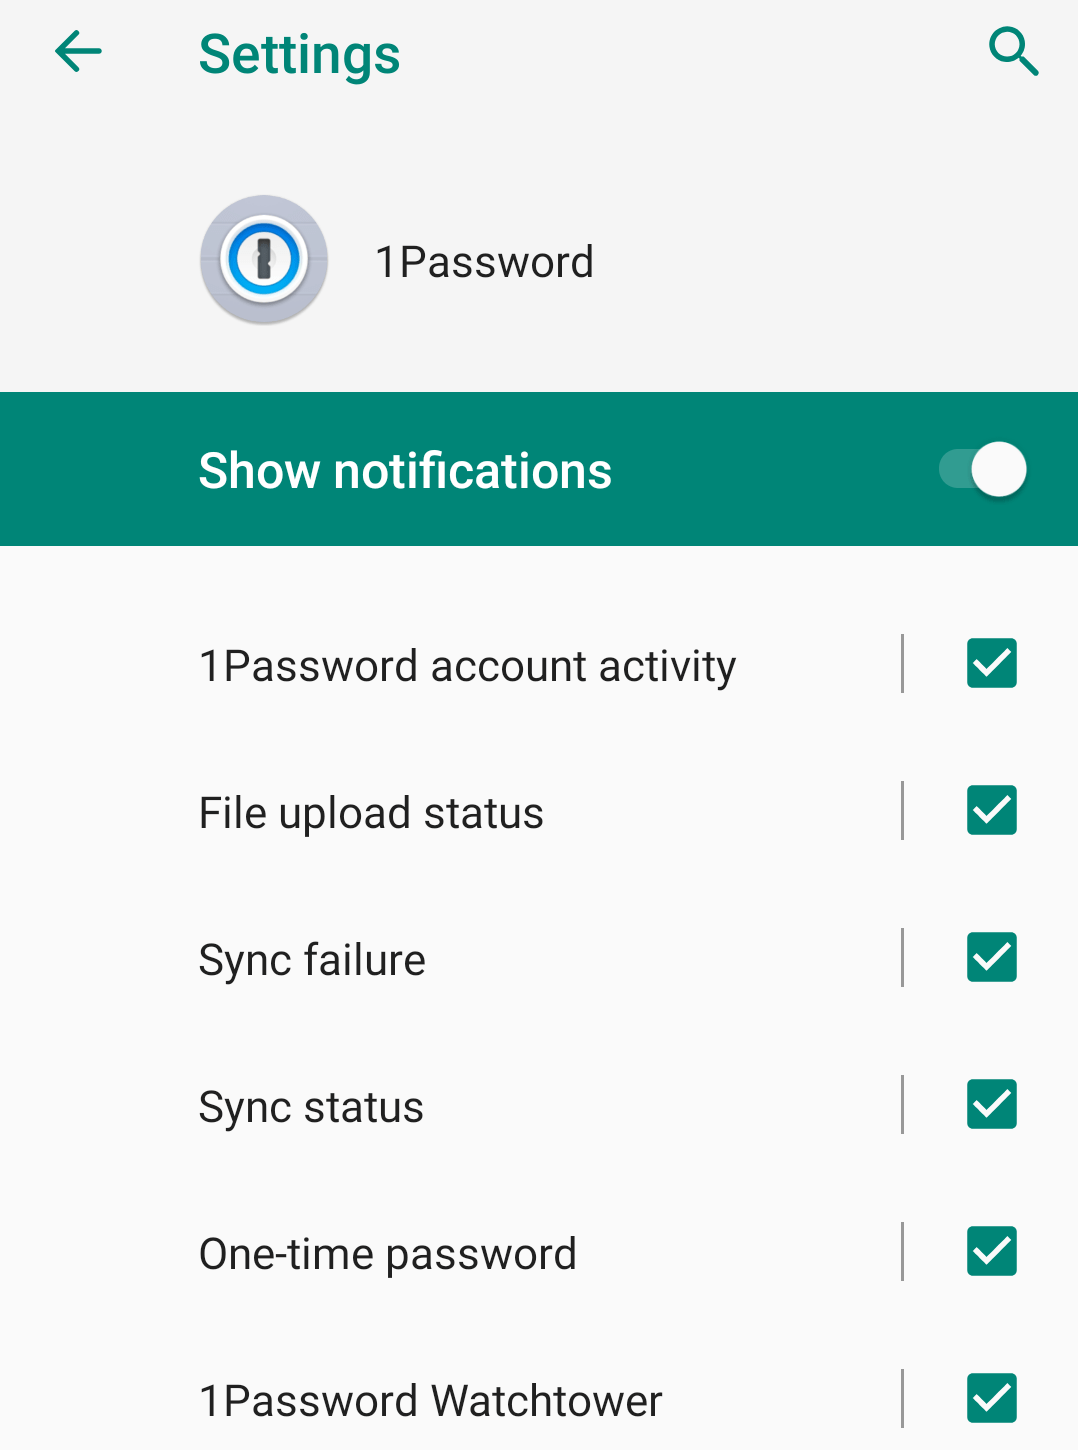 1Password notification settings in the Android Settings app